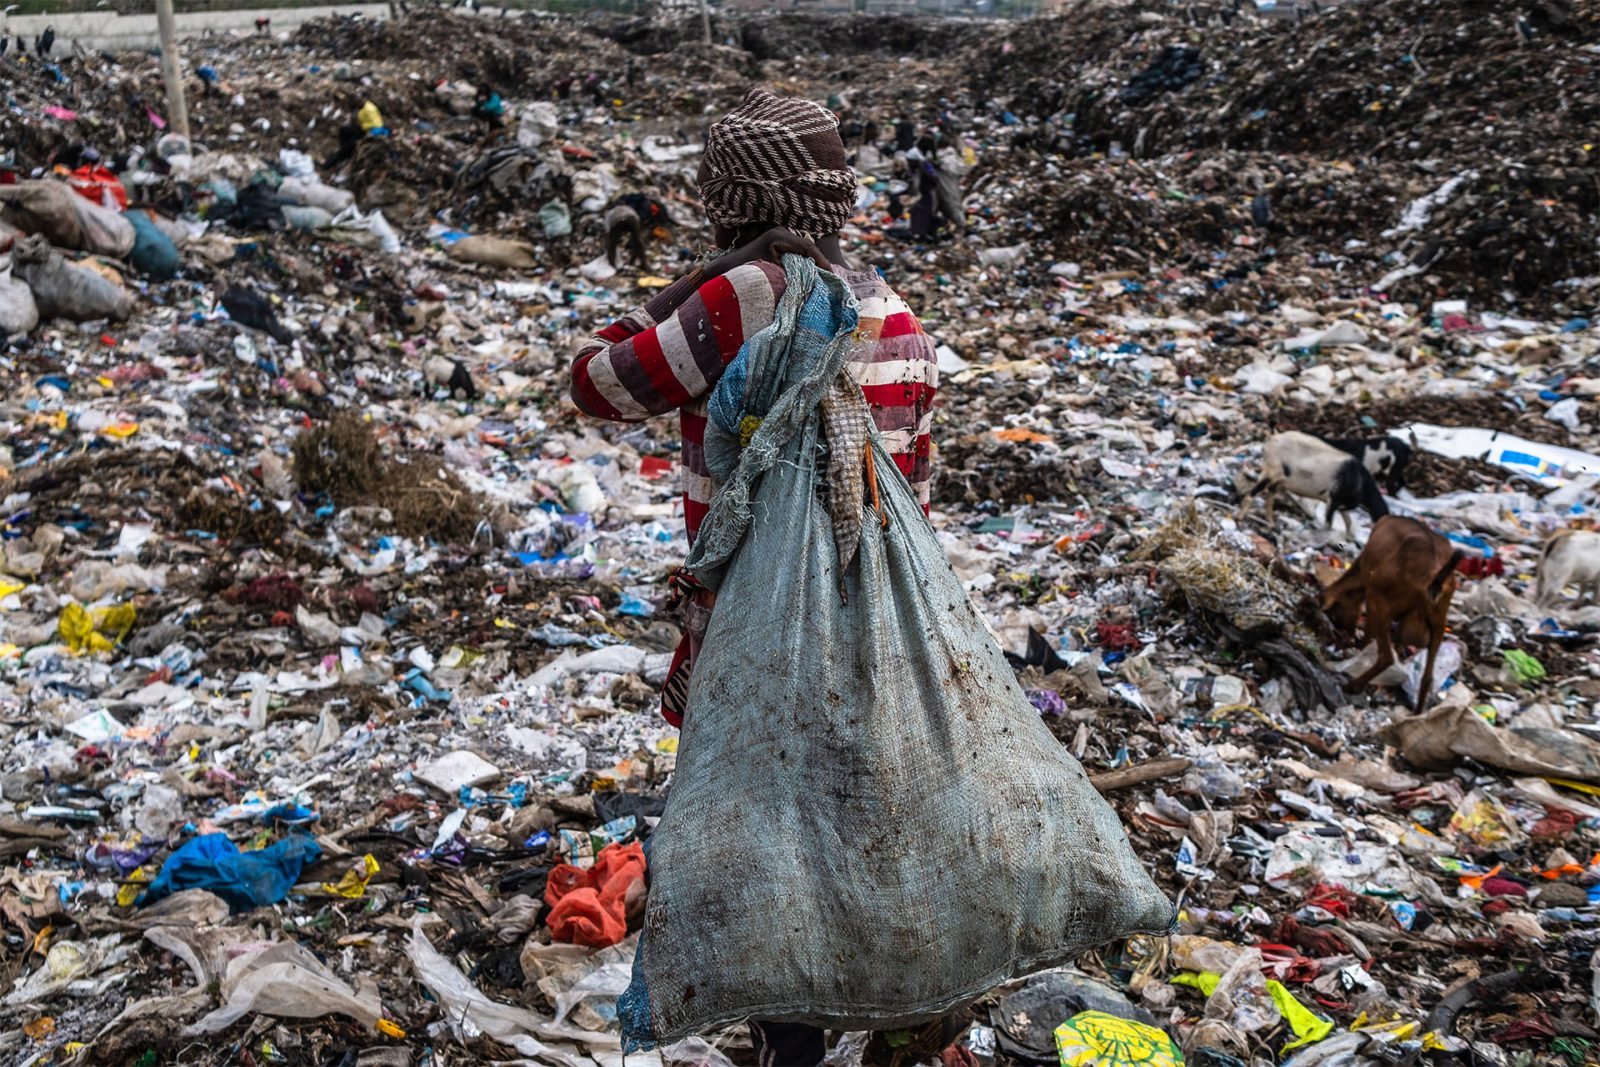 A photo of a person holding a bag of trash at a dumpsite